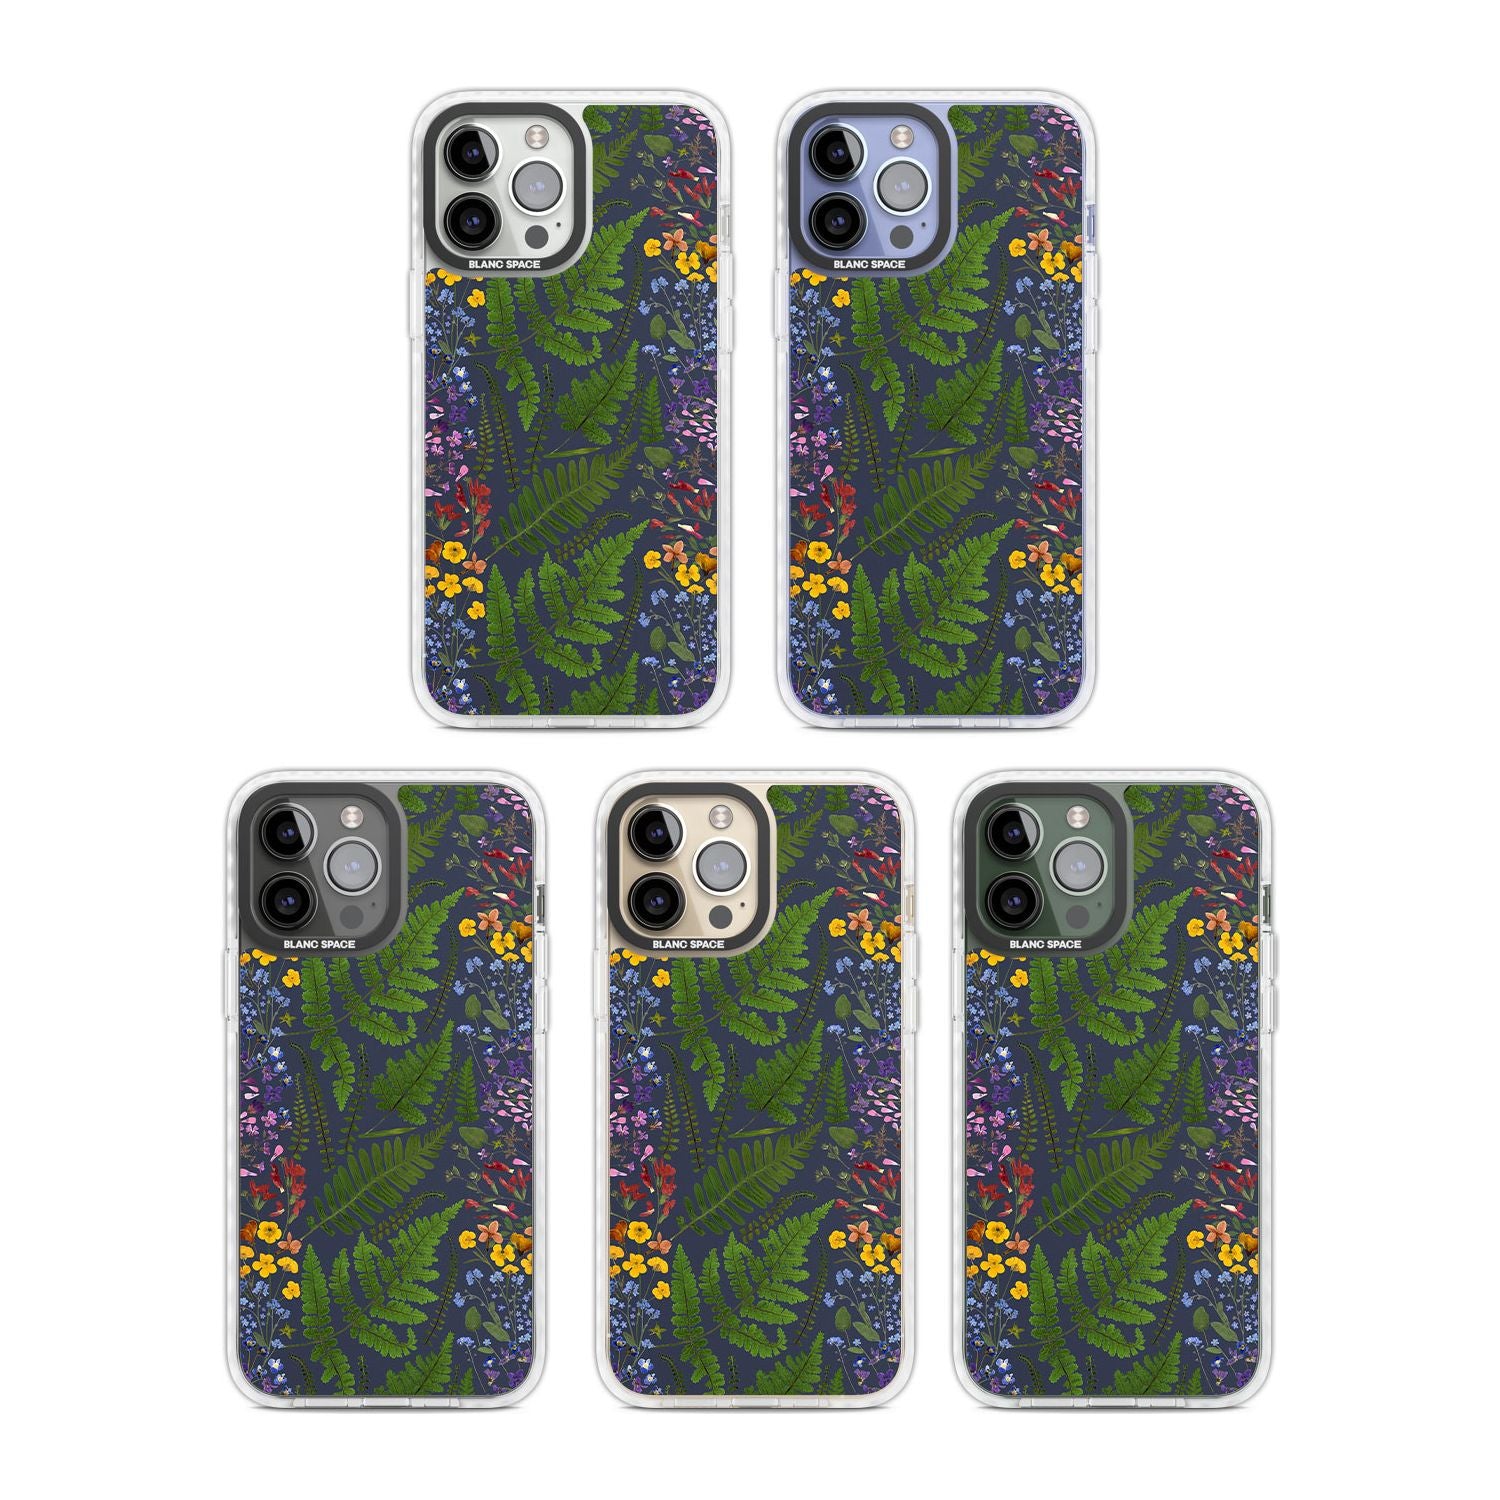 Busy Floral and Fern Design - Navy